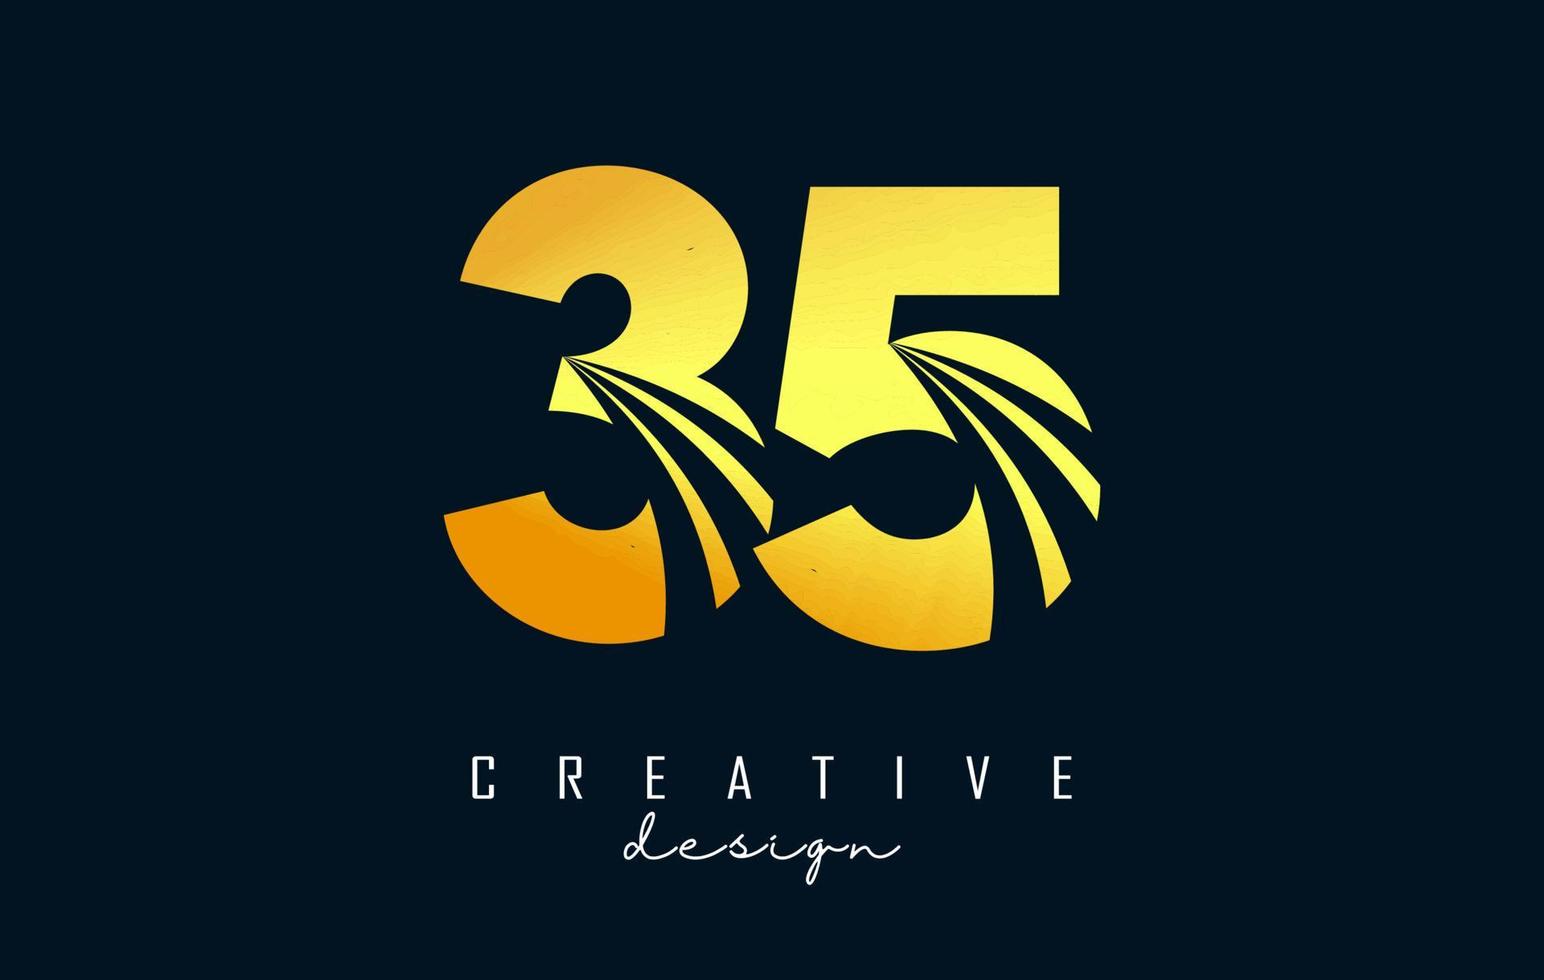 Golden Creative number 35 3 5 logo with leading lines and road concept design. Number with geometric design. vector